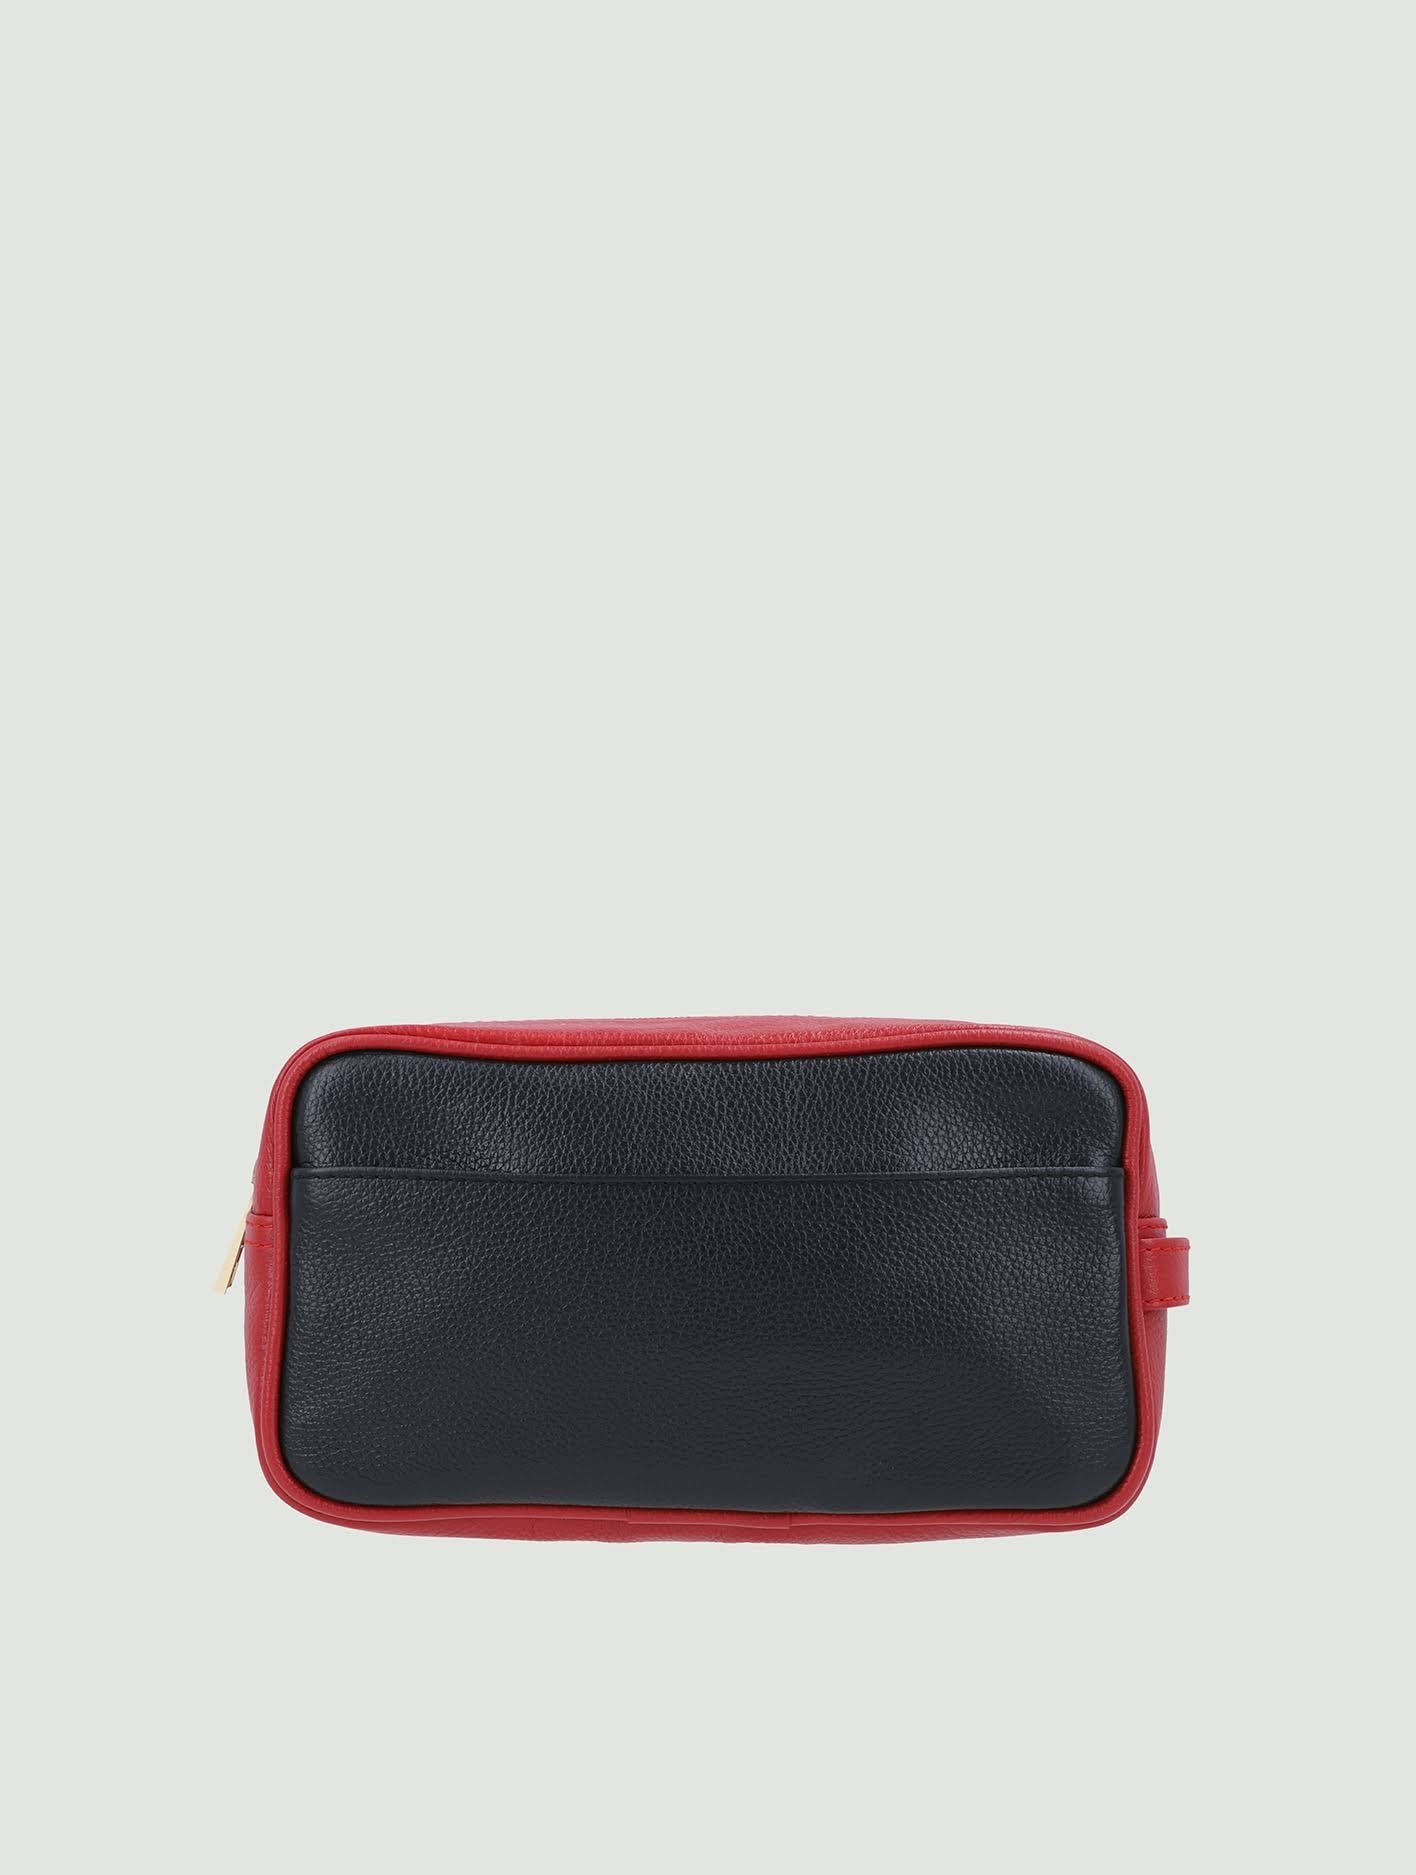 Dual Color Toiletry Leather Bag